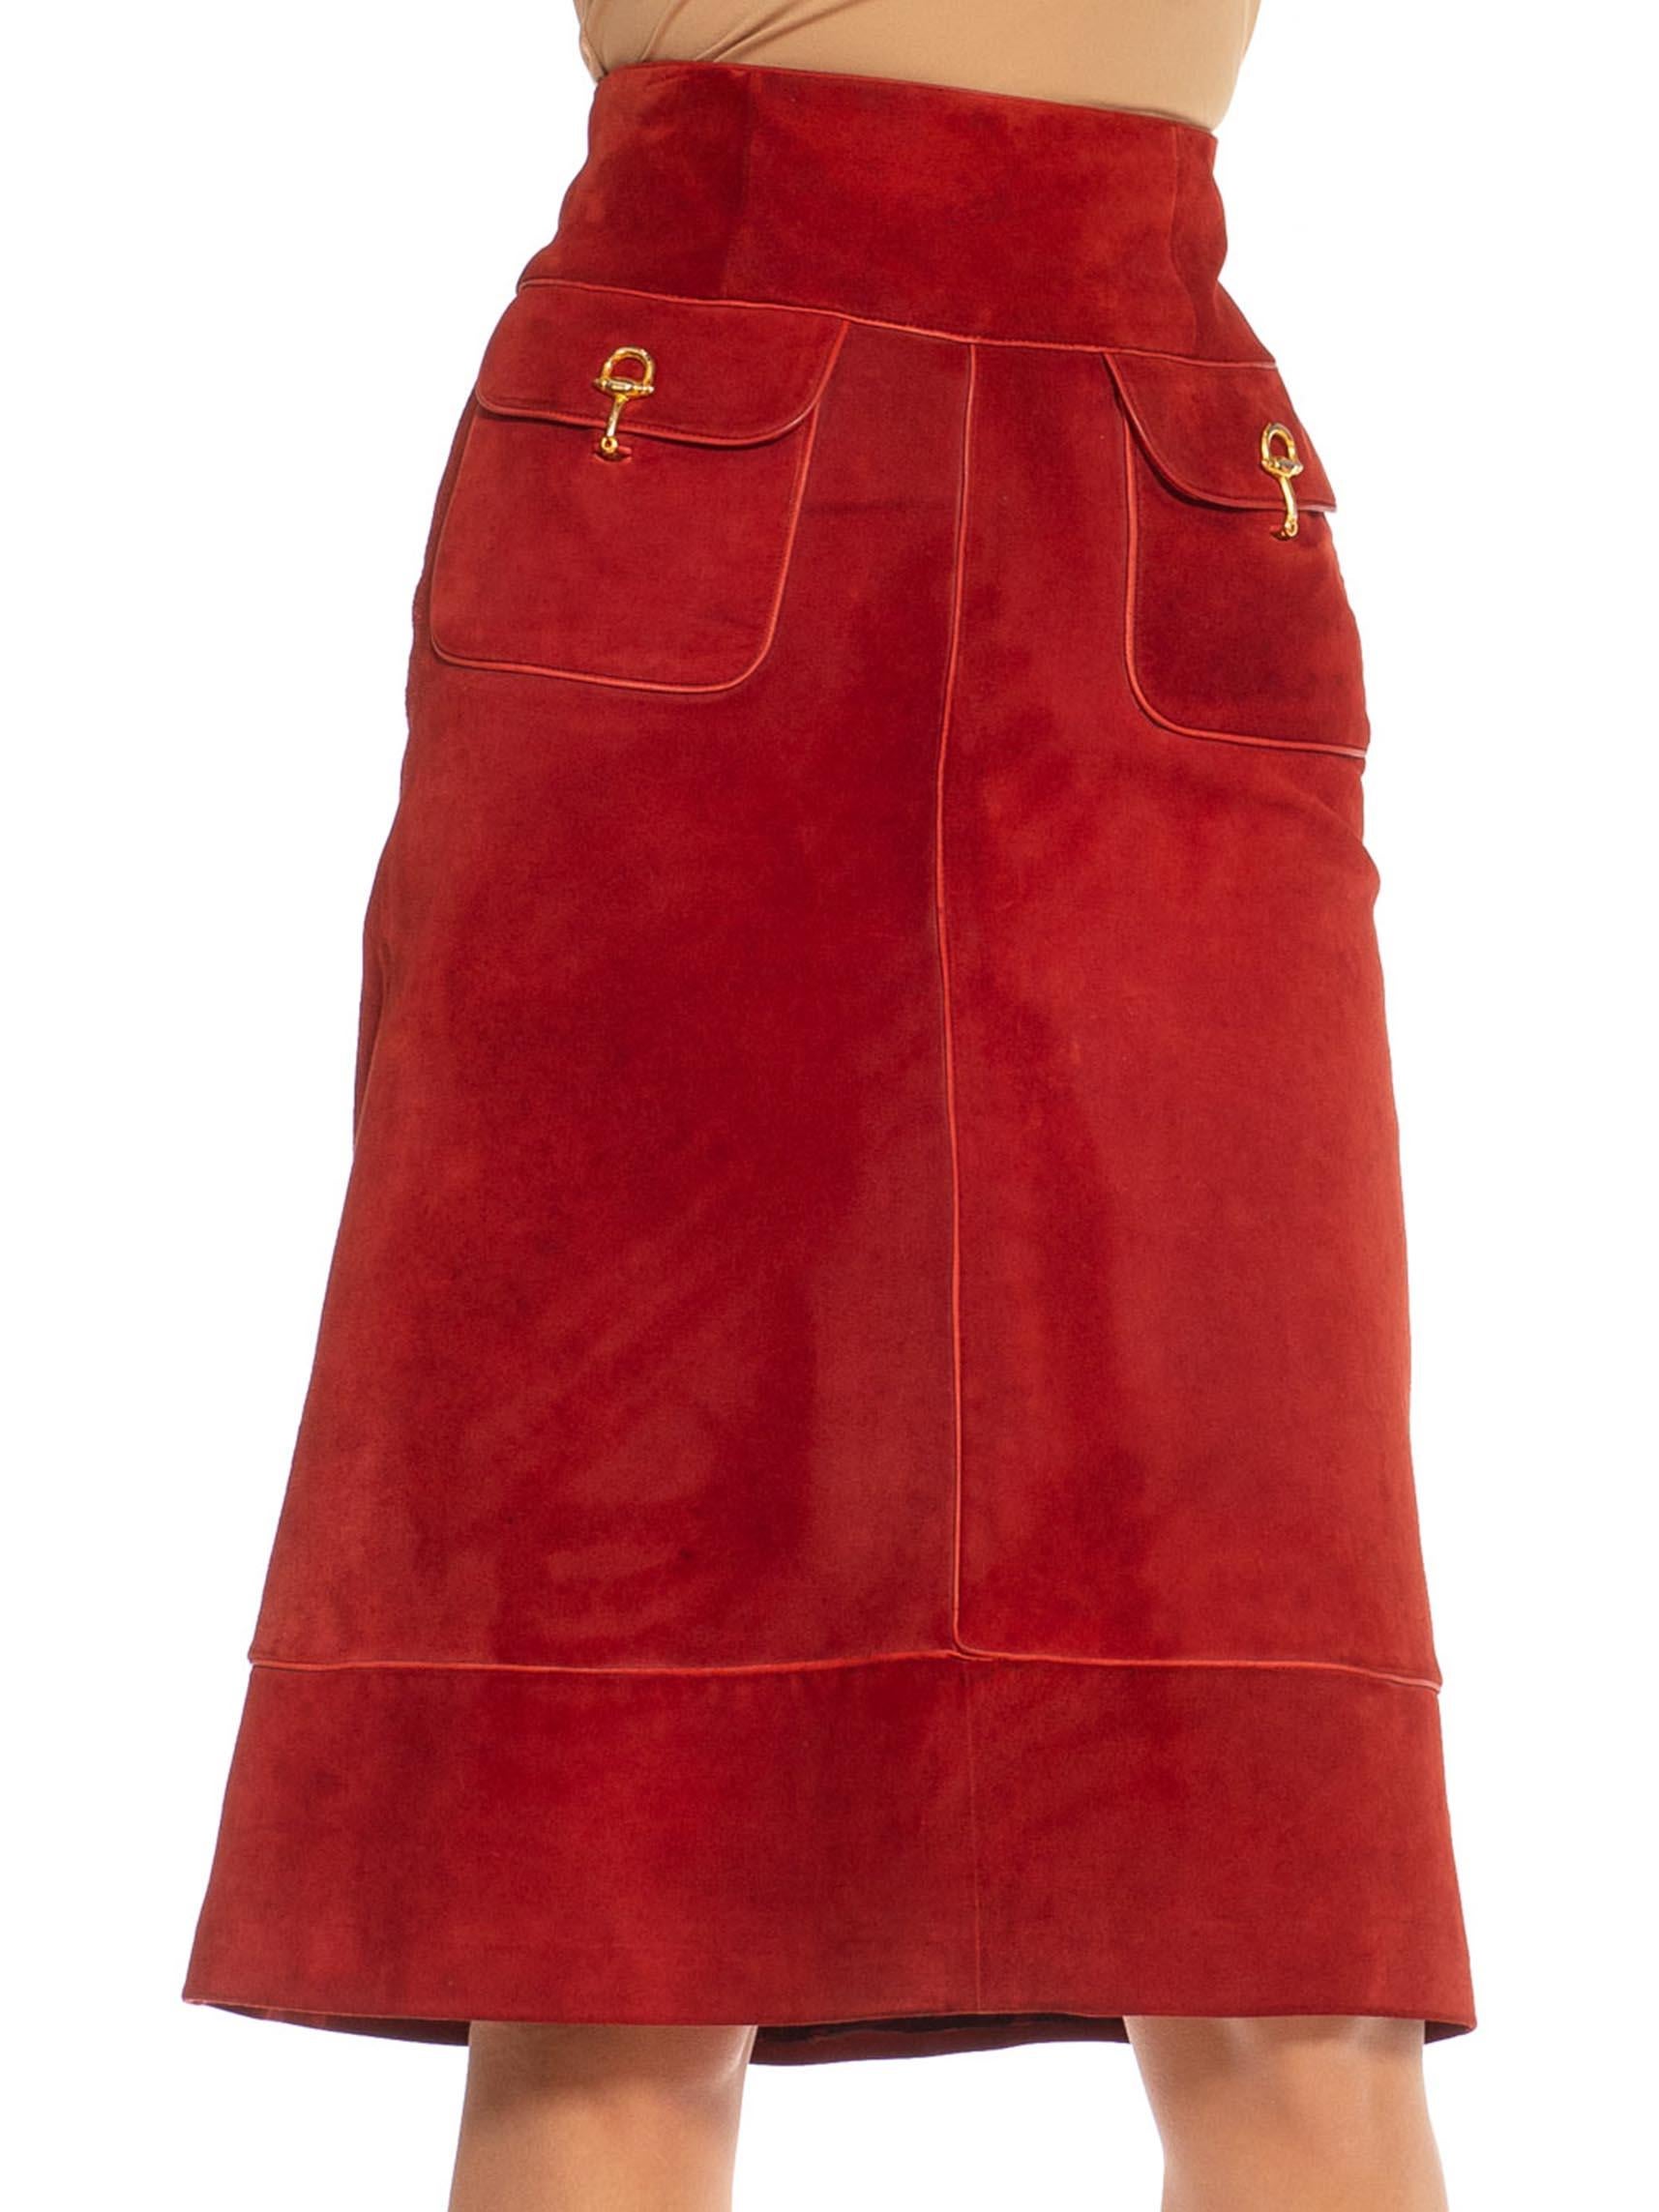 1990S GUCCI Burgundy & Gold Suede Midi Buckle Skirt 2